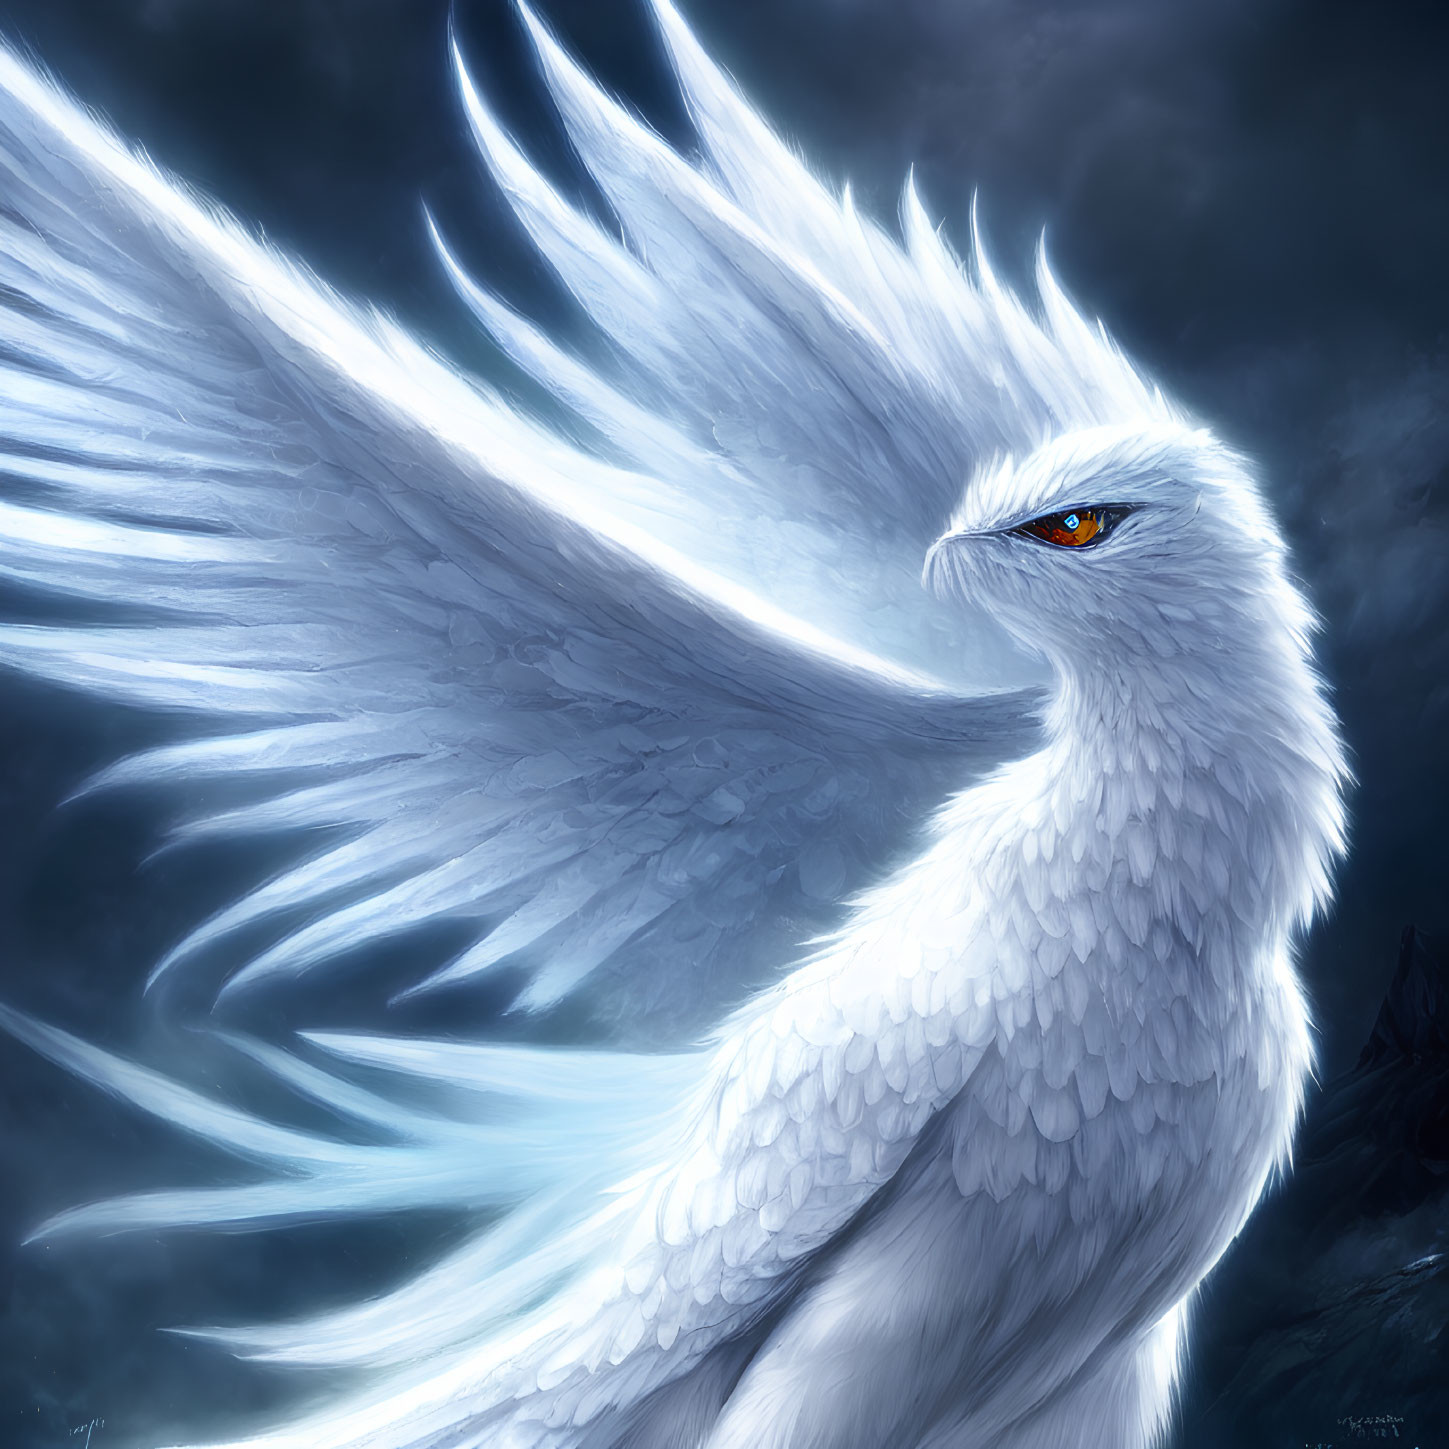 White Bird with Glowing Orange Eyes and Detailed Wings in Stormy Scene